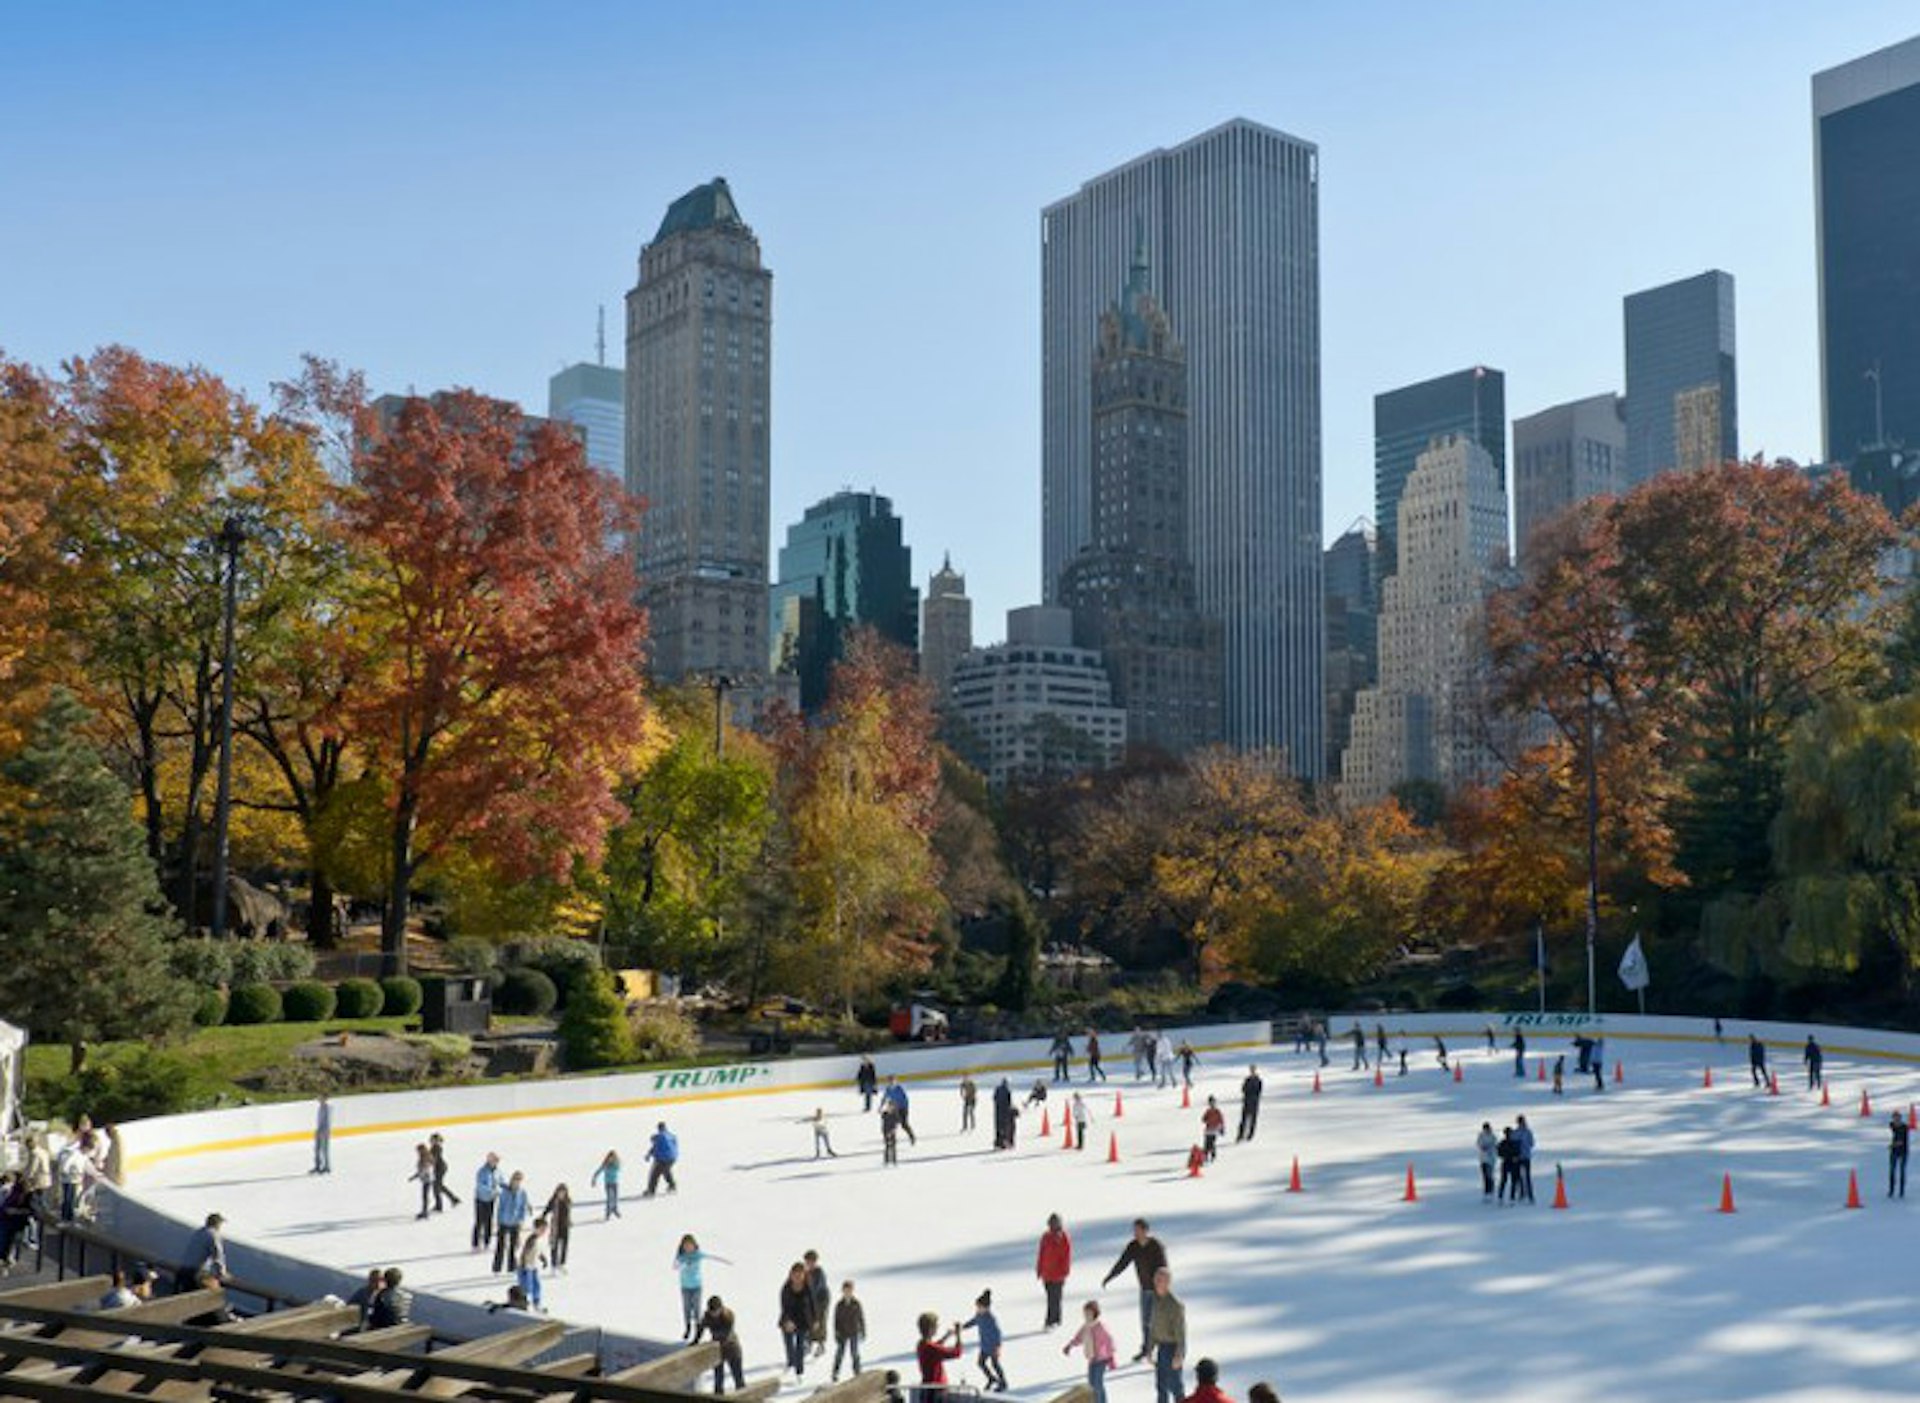 Ice-skating in Central Park. Image by Dan Souza / CC BY-SA 2.0